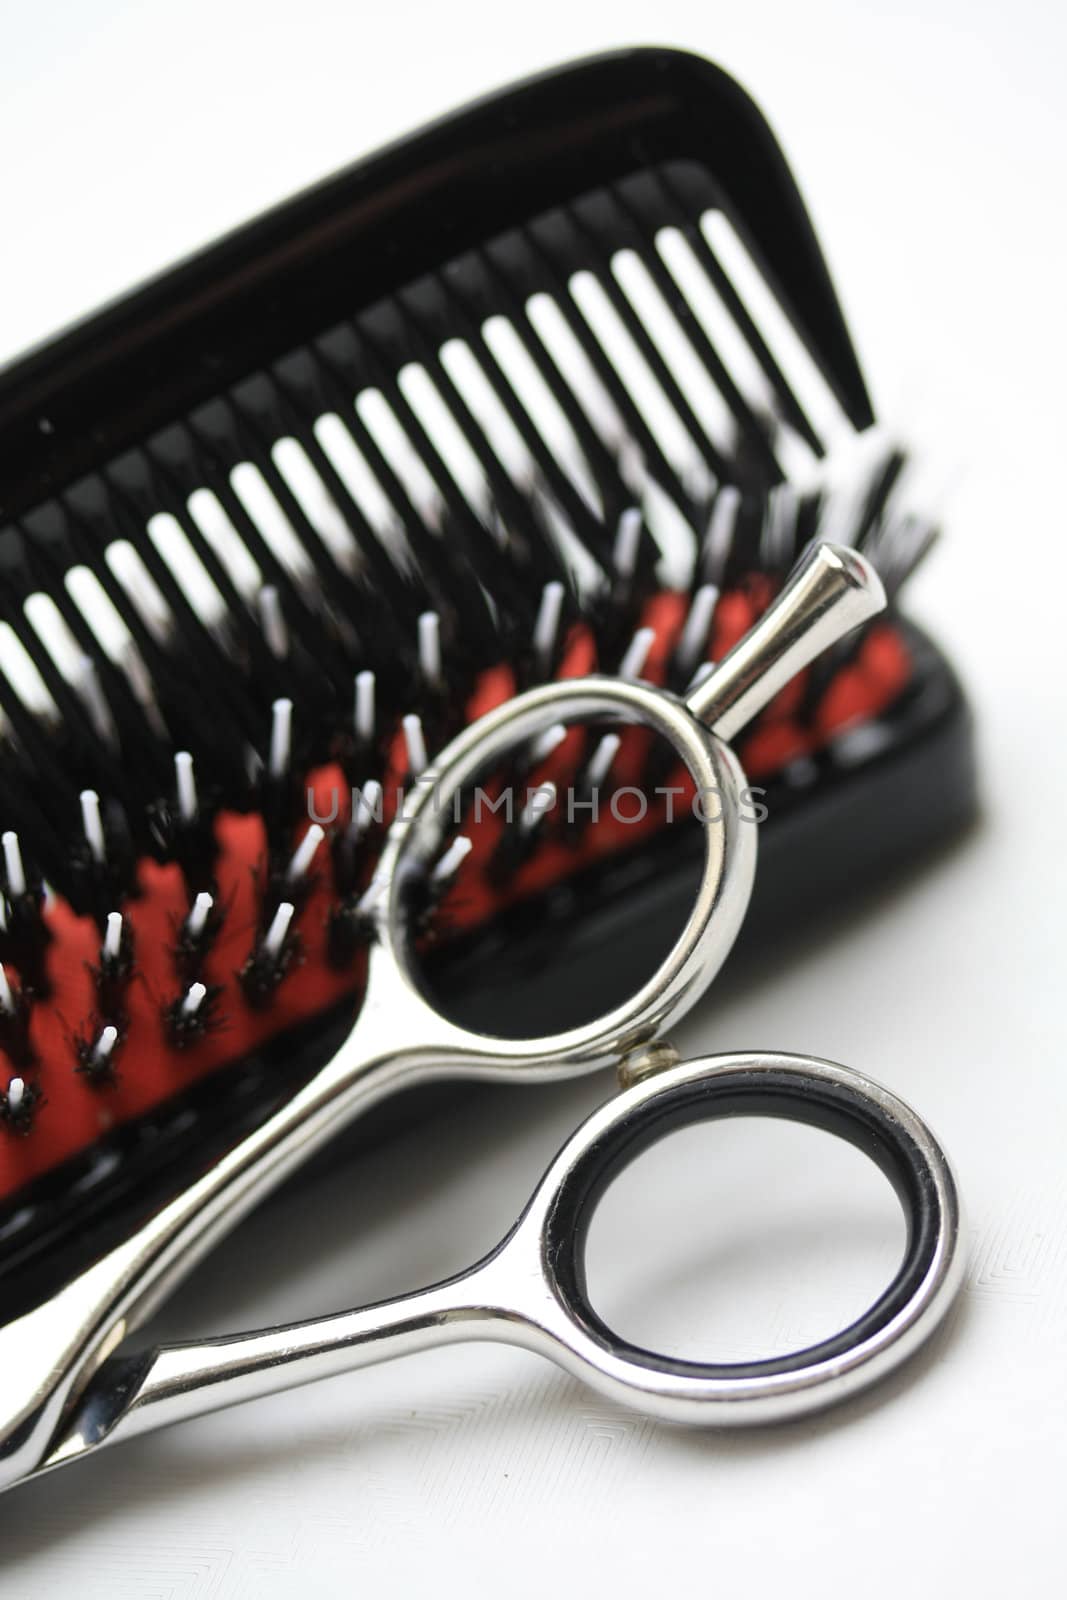 A pair of hairdressers scissors, a comb and a brush, the basic equipment for any hairdresser